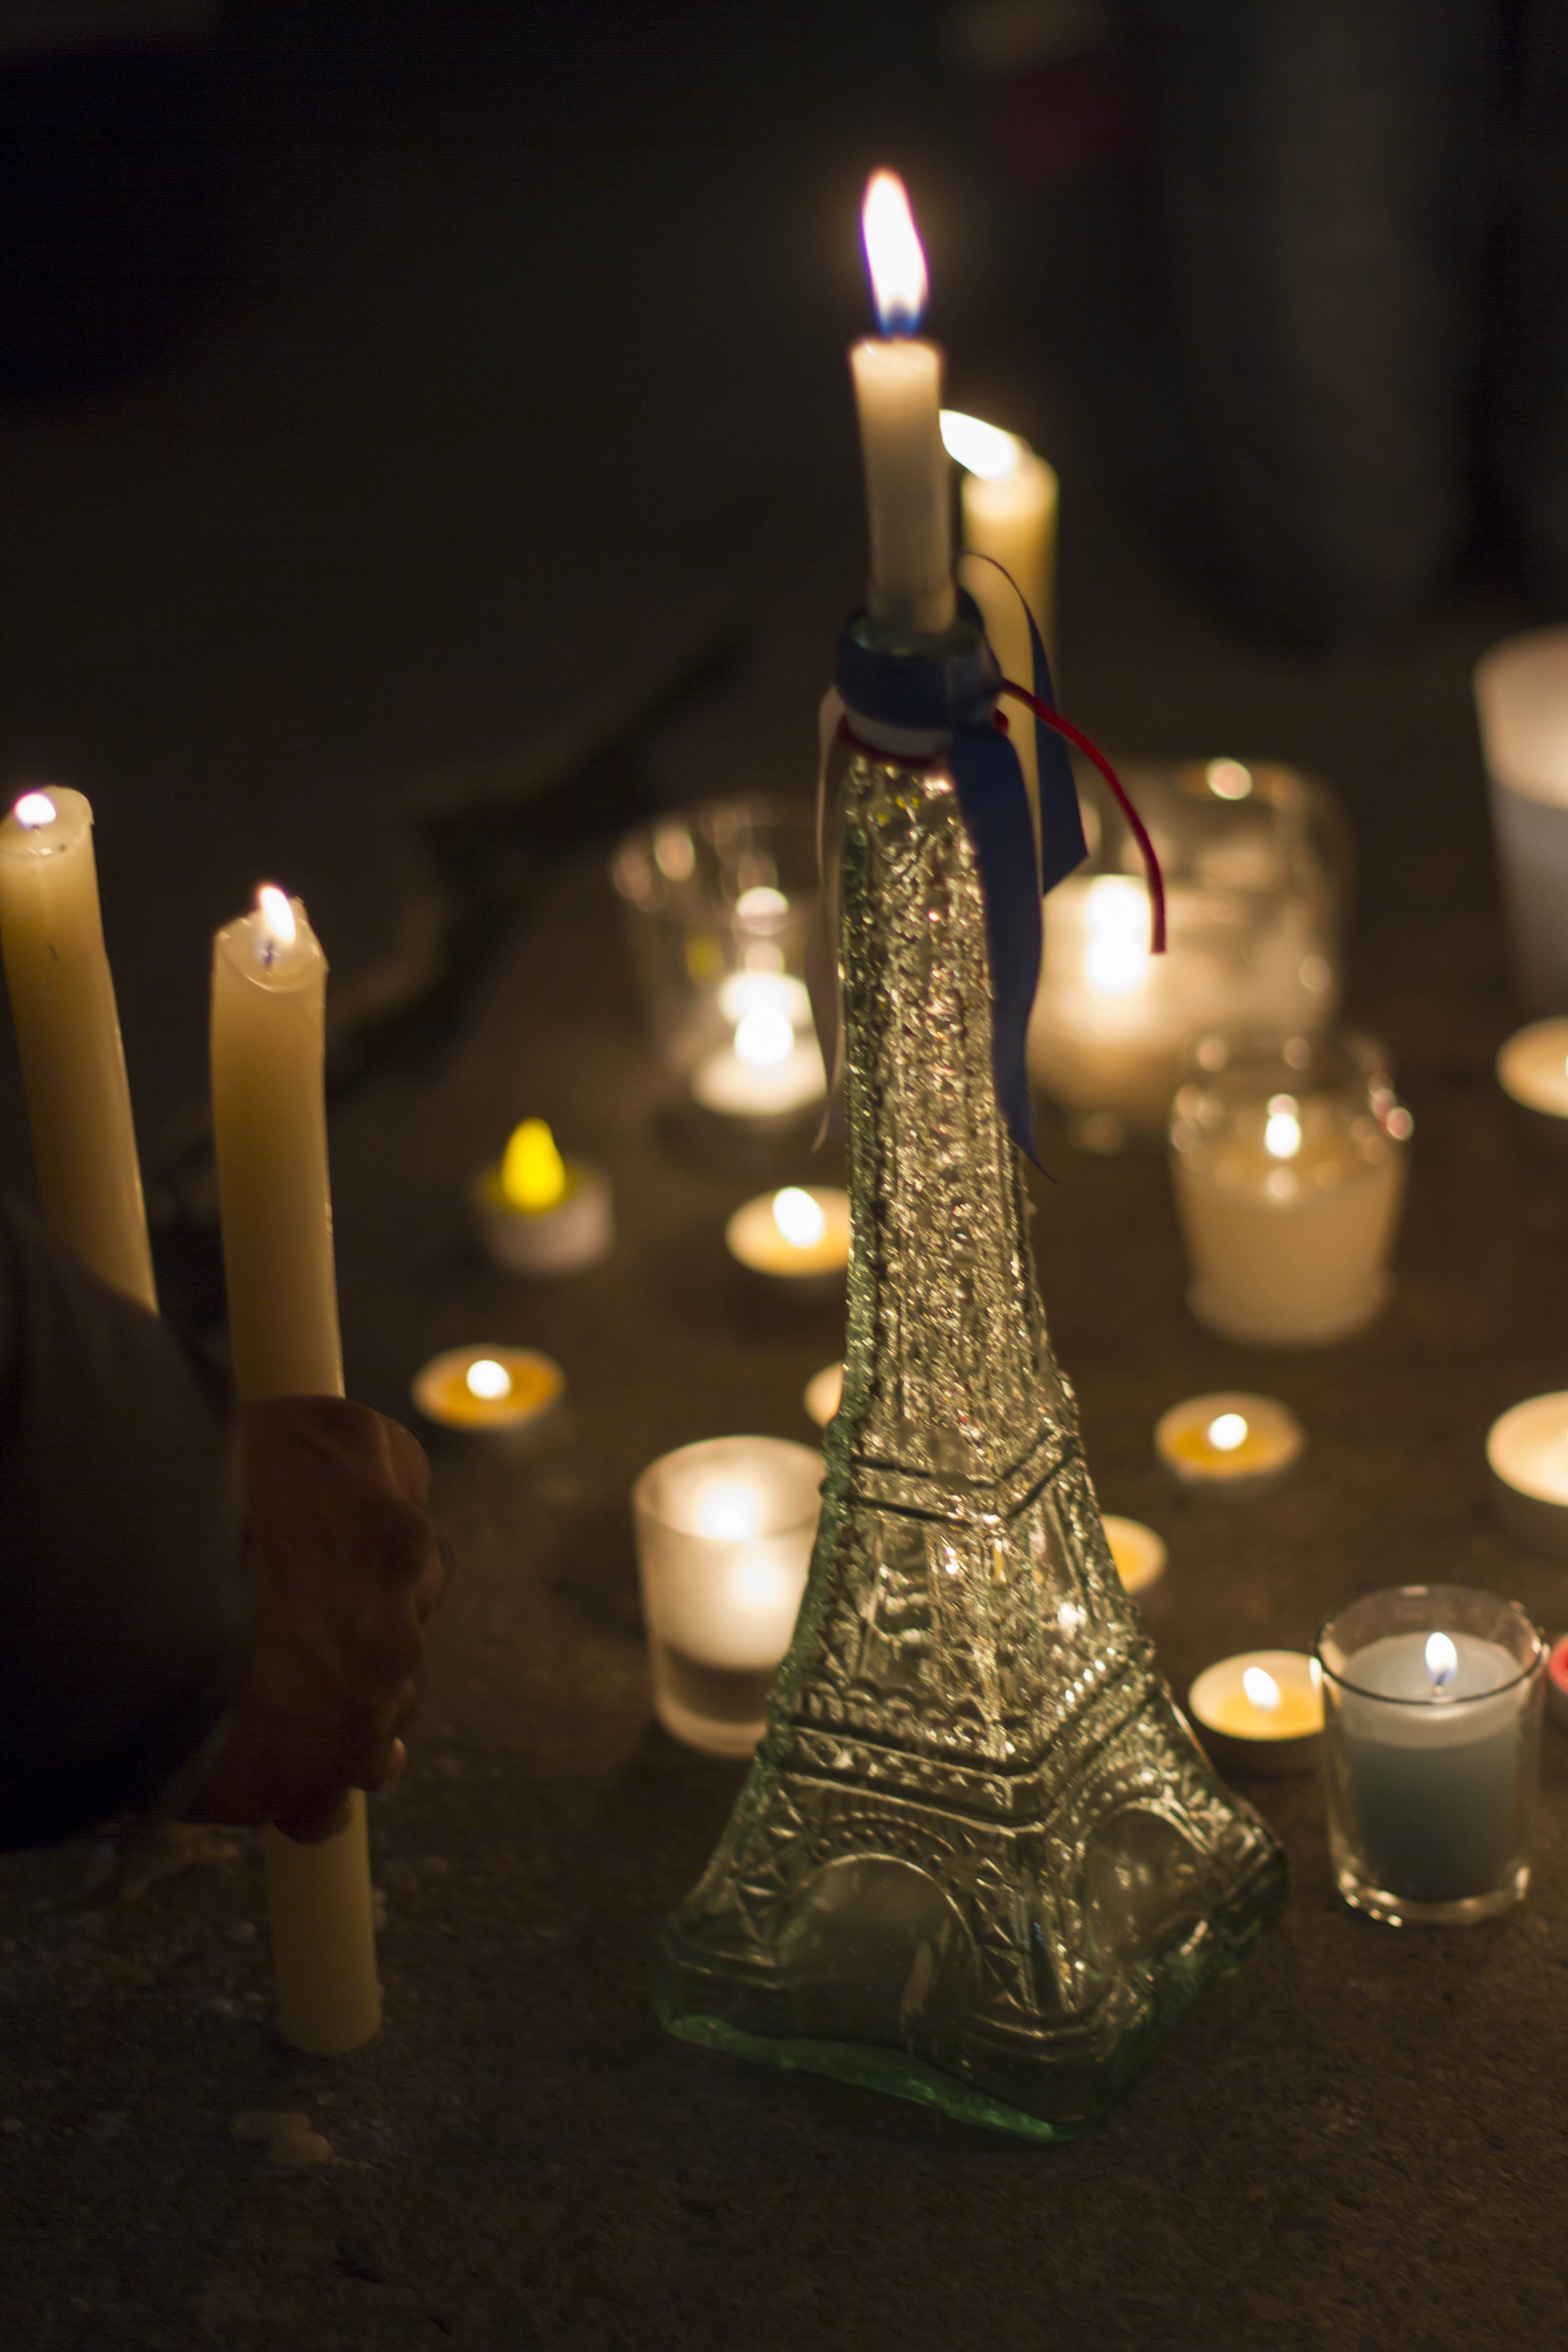 Paris has been declared under a state of emergency following the attacks.